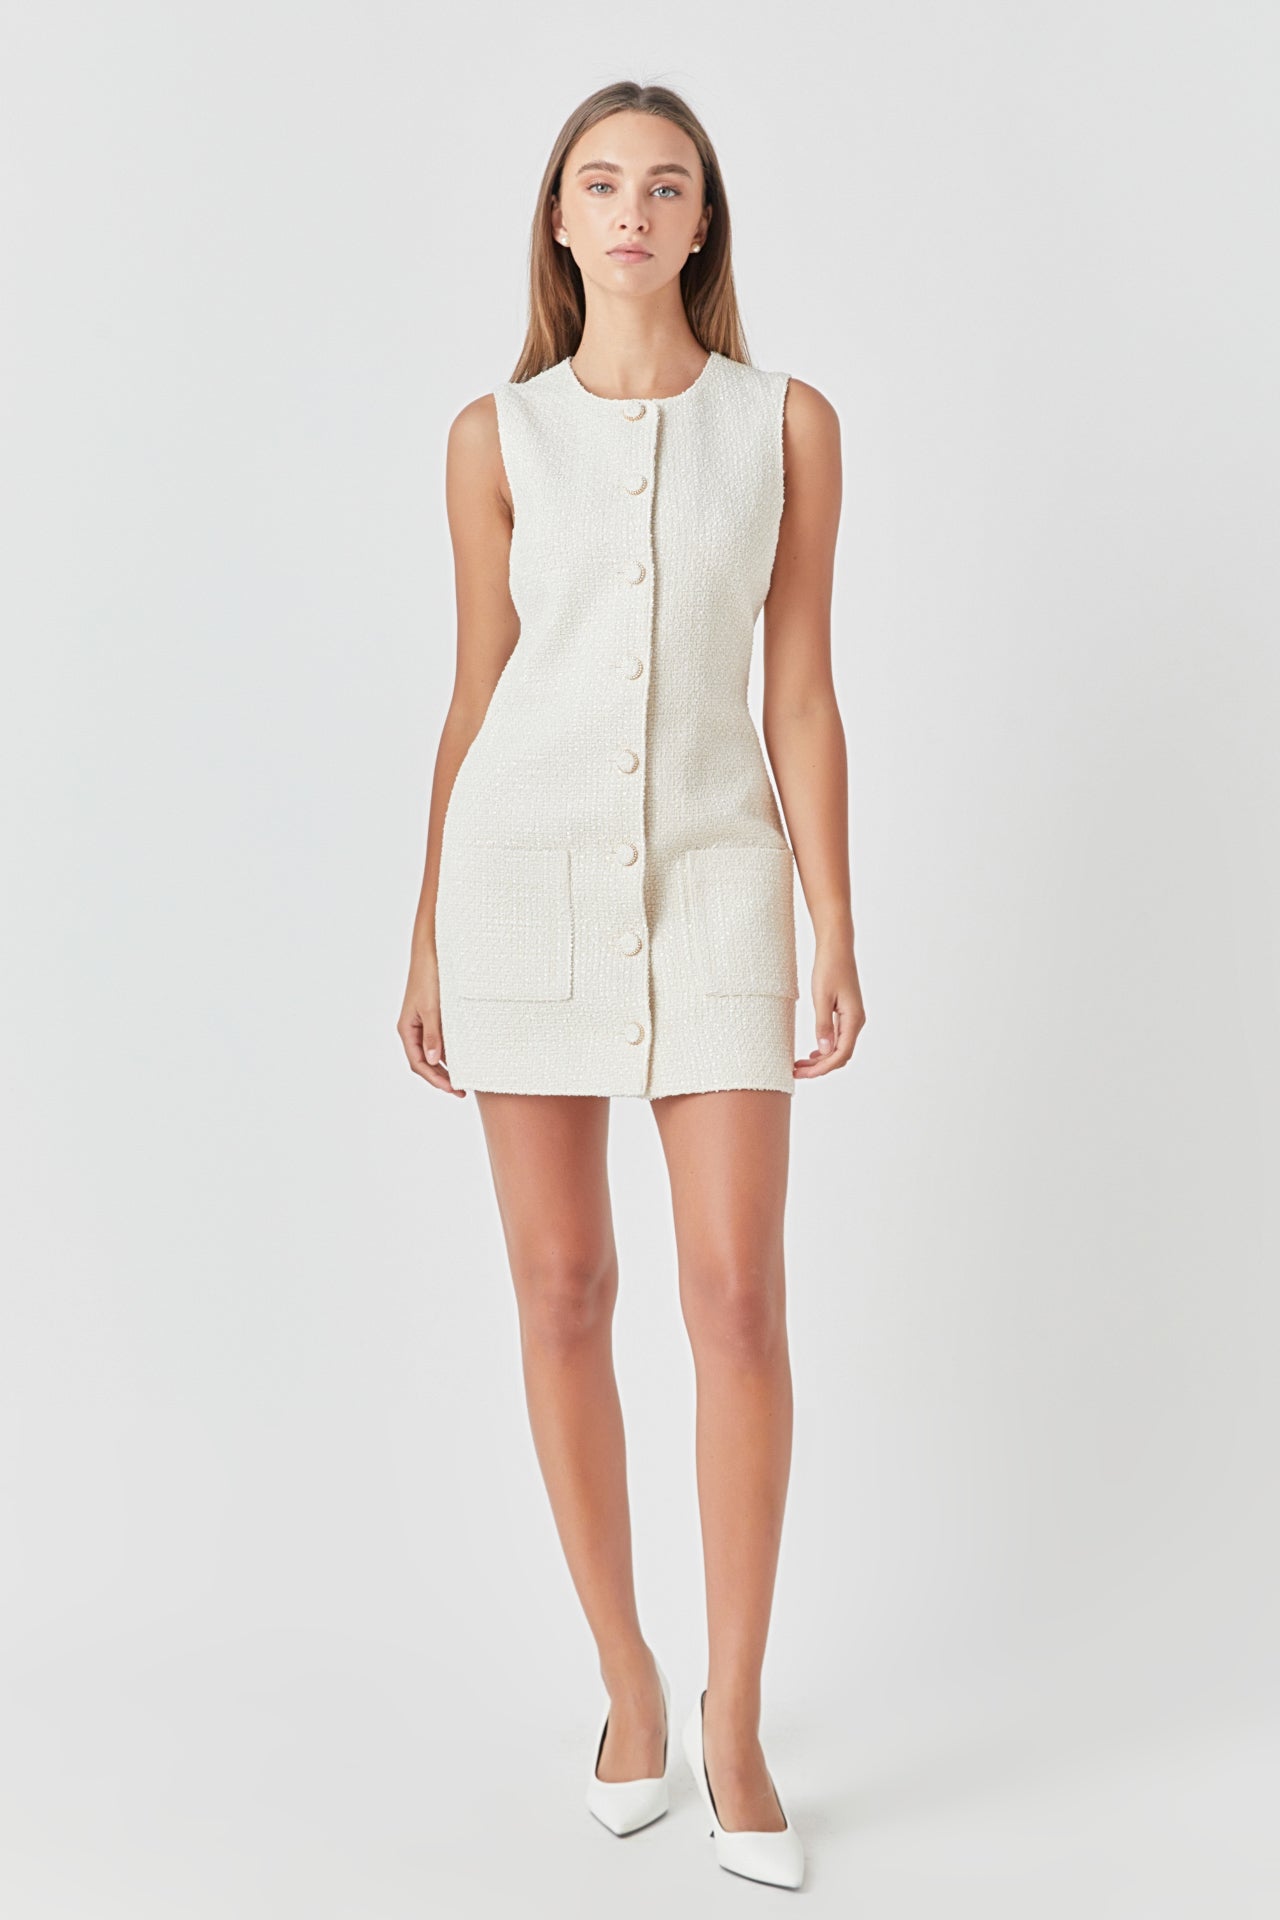 Theory Sleeveless Knit Dress in White | Lyst